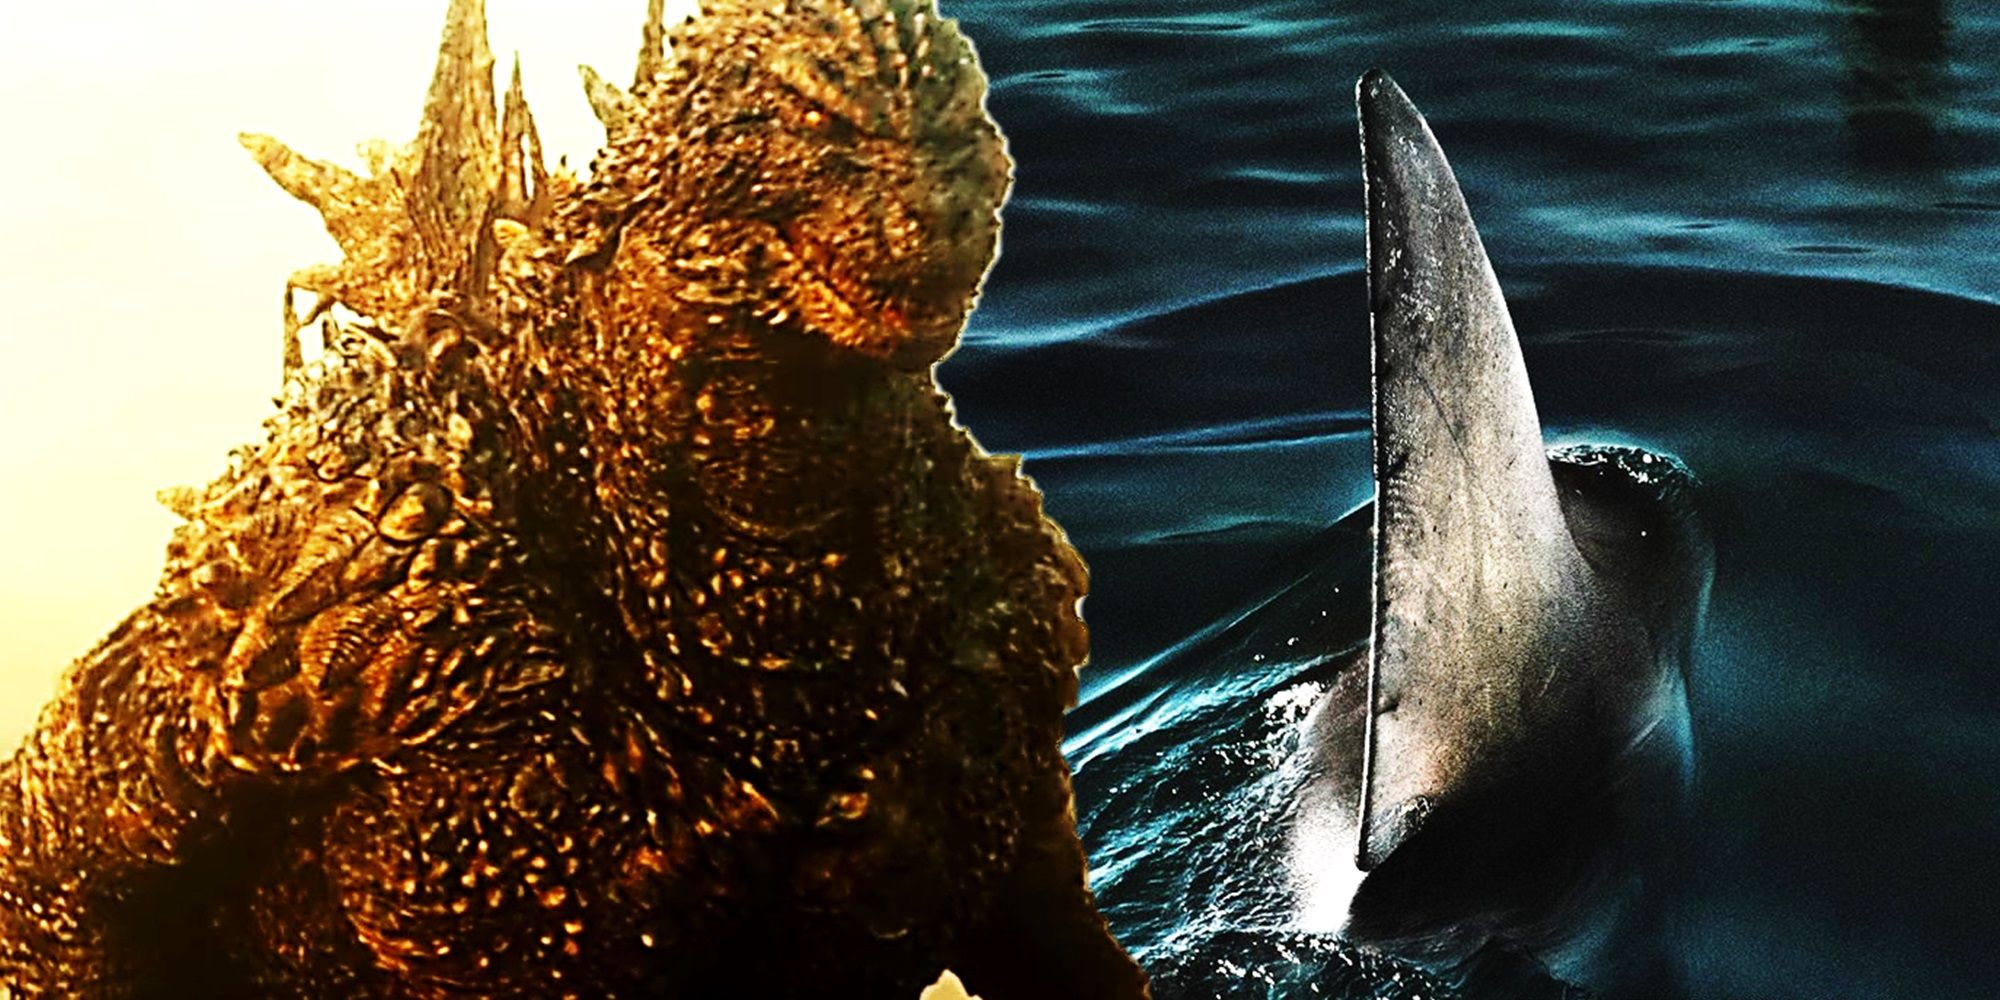 Collage of Godzilla in Godzilla Minus One and the shark in Under Paris